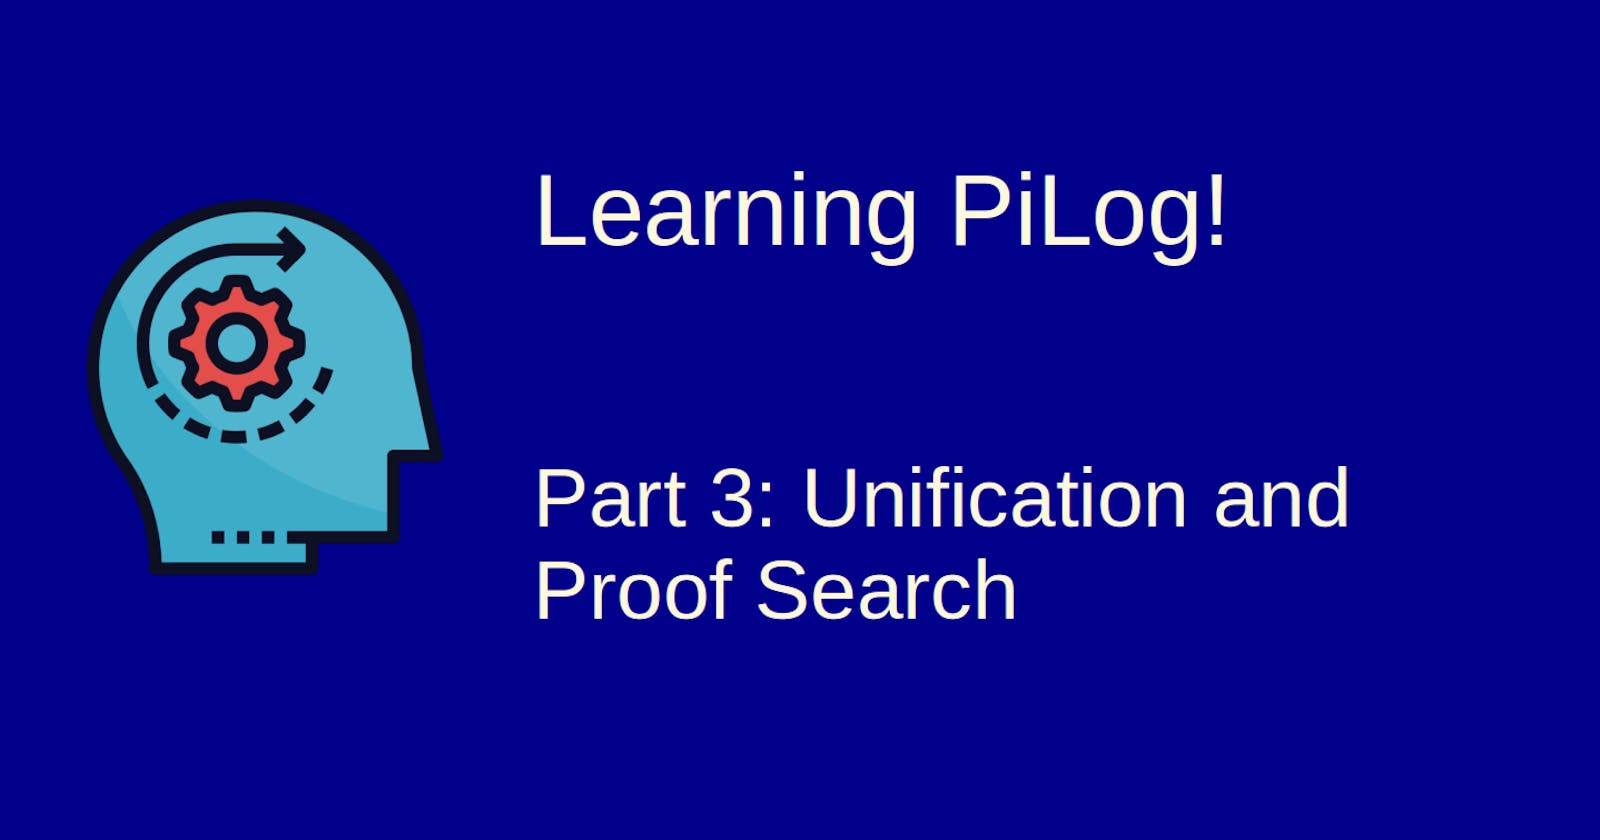 Learning Pilog -3: Unification and Proof Search